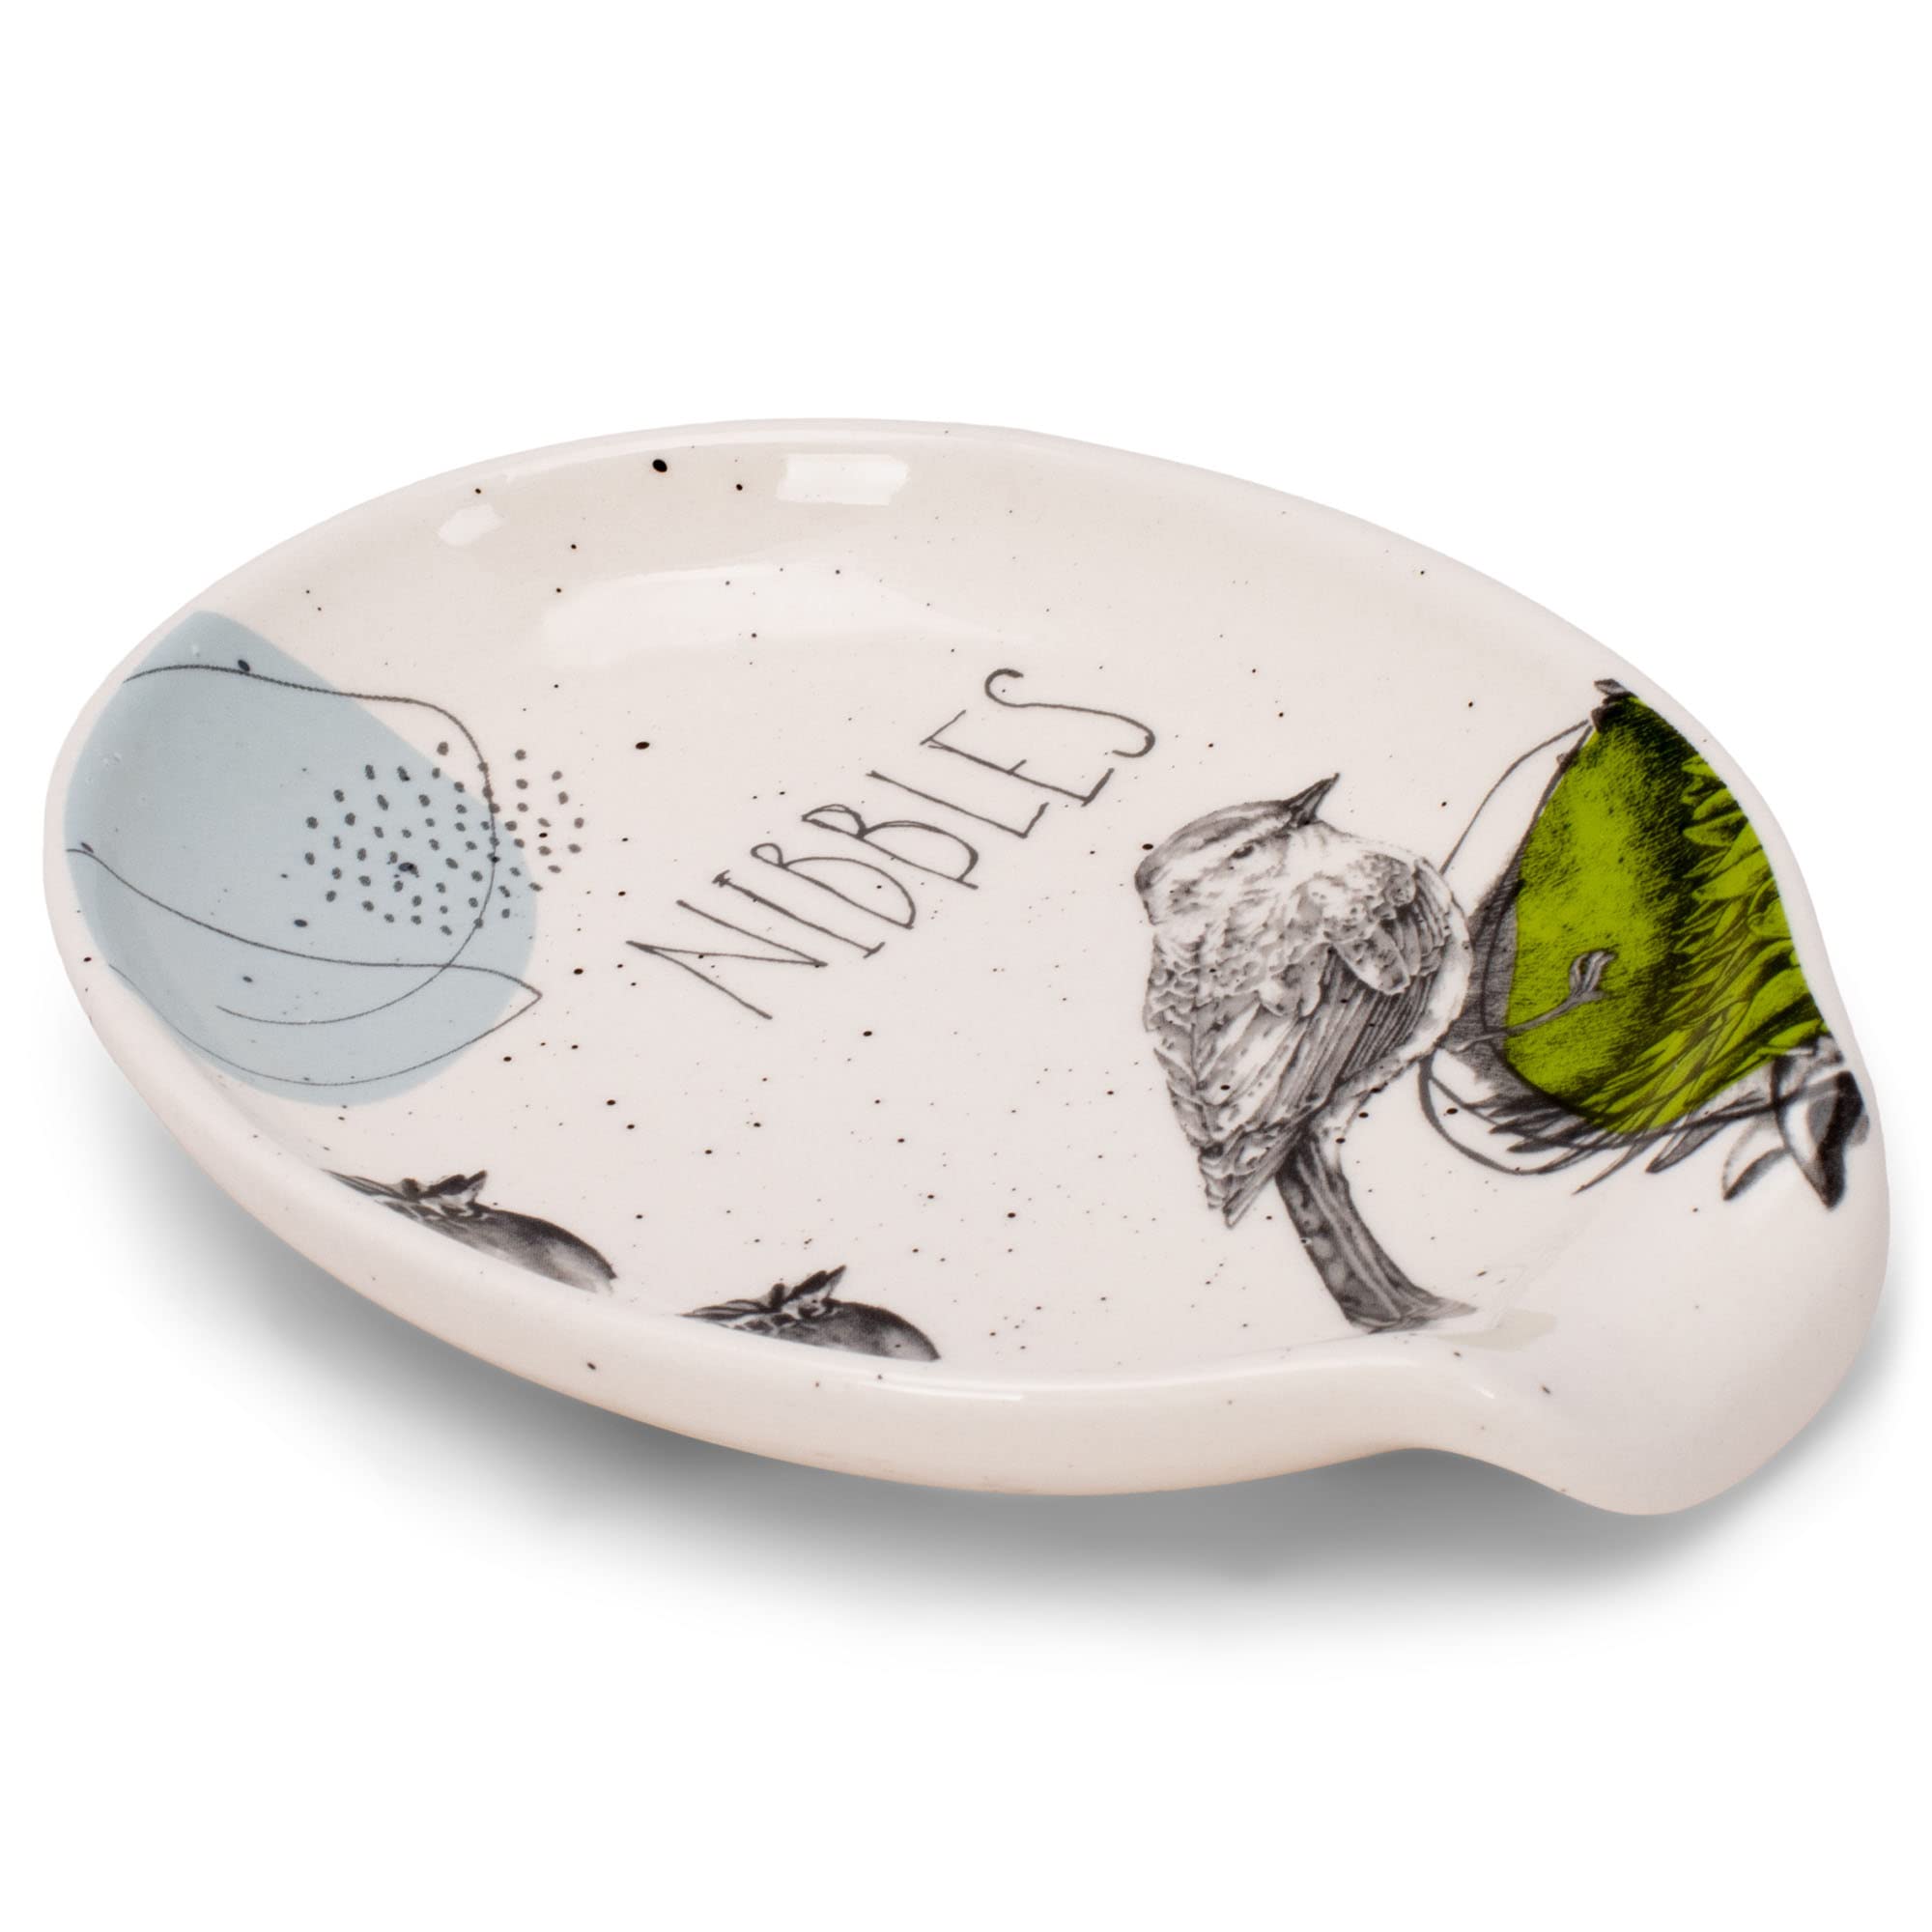 DEMDACO Nibbles Bird Glossy Floral White 6 x 5 Stoneware Ceramic Oval Spoon Rest